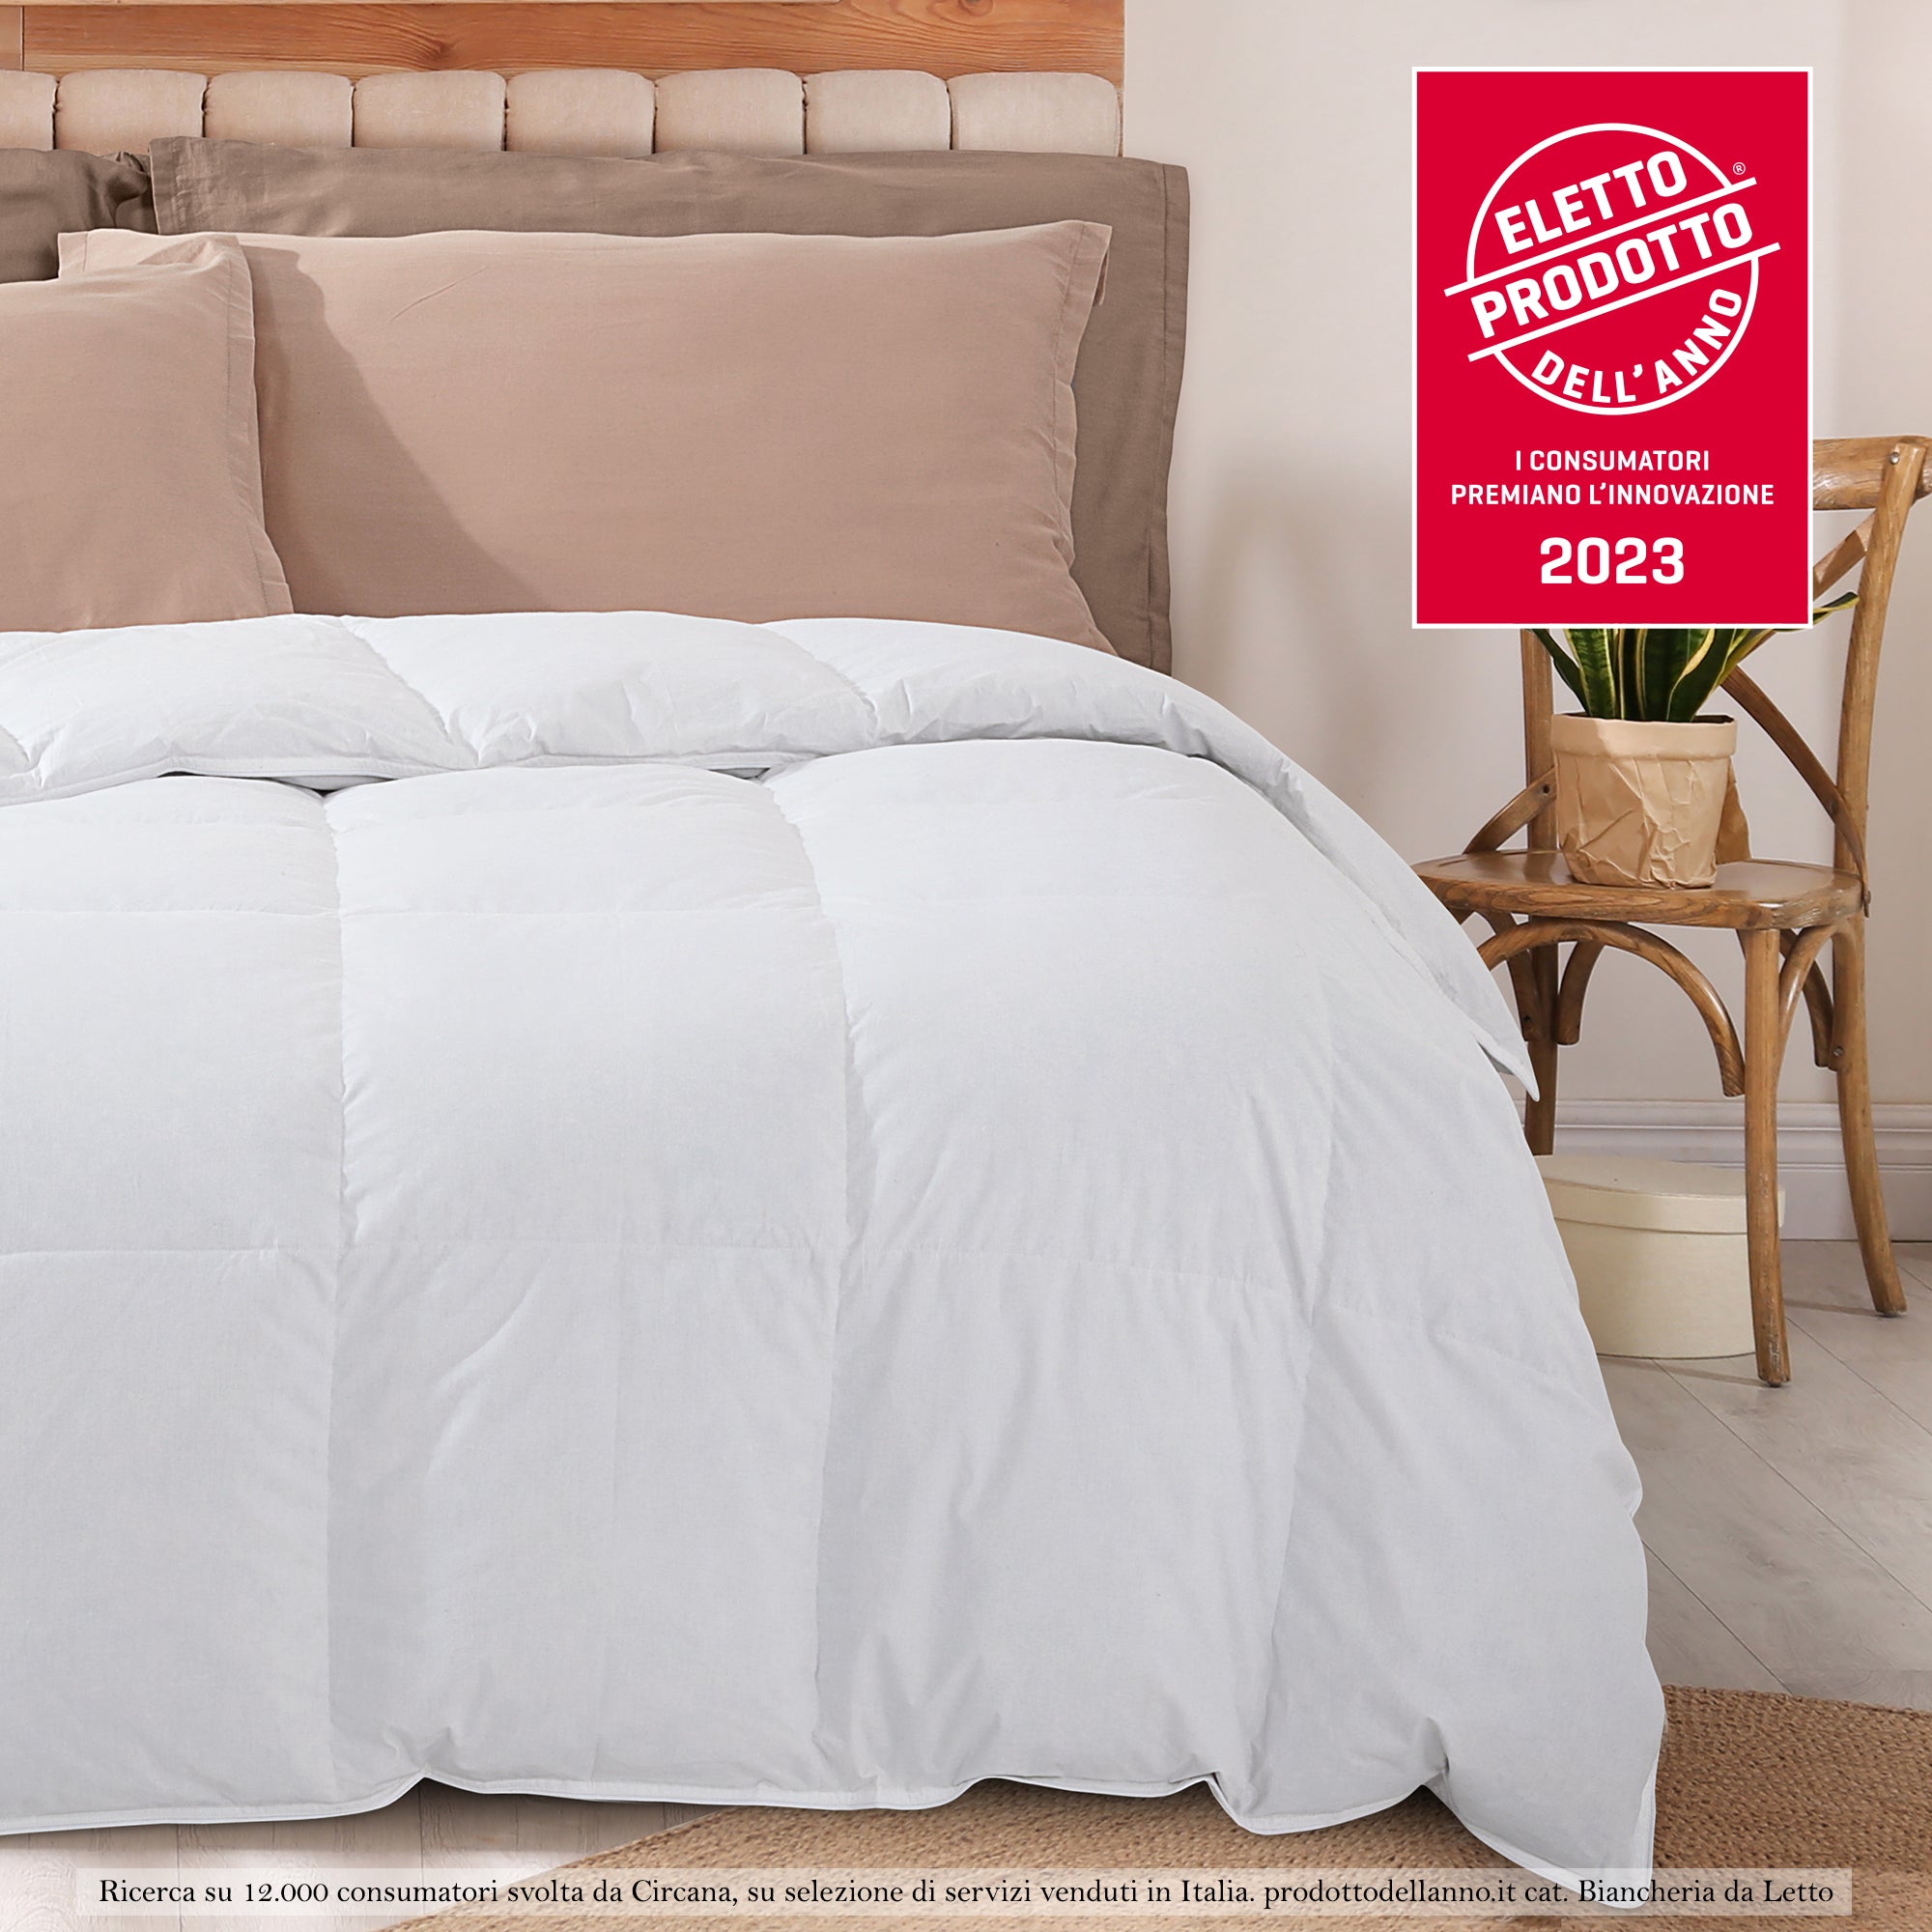 Polar 4* Winter Down duvet in 100% Goose Down | Elected Product of the Year 2023